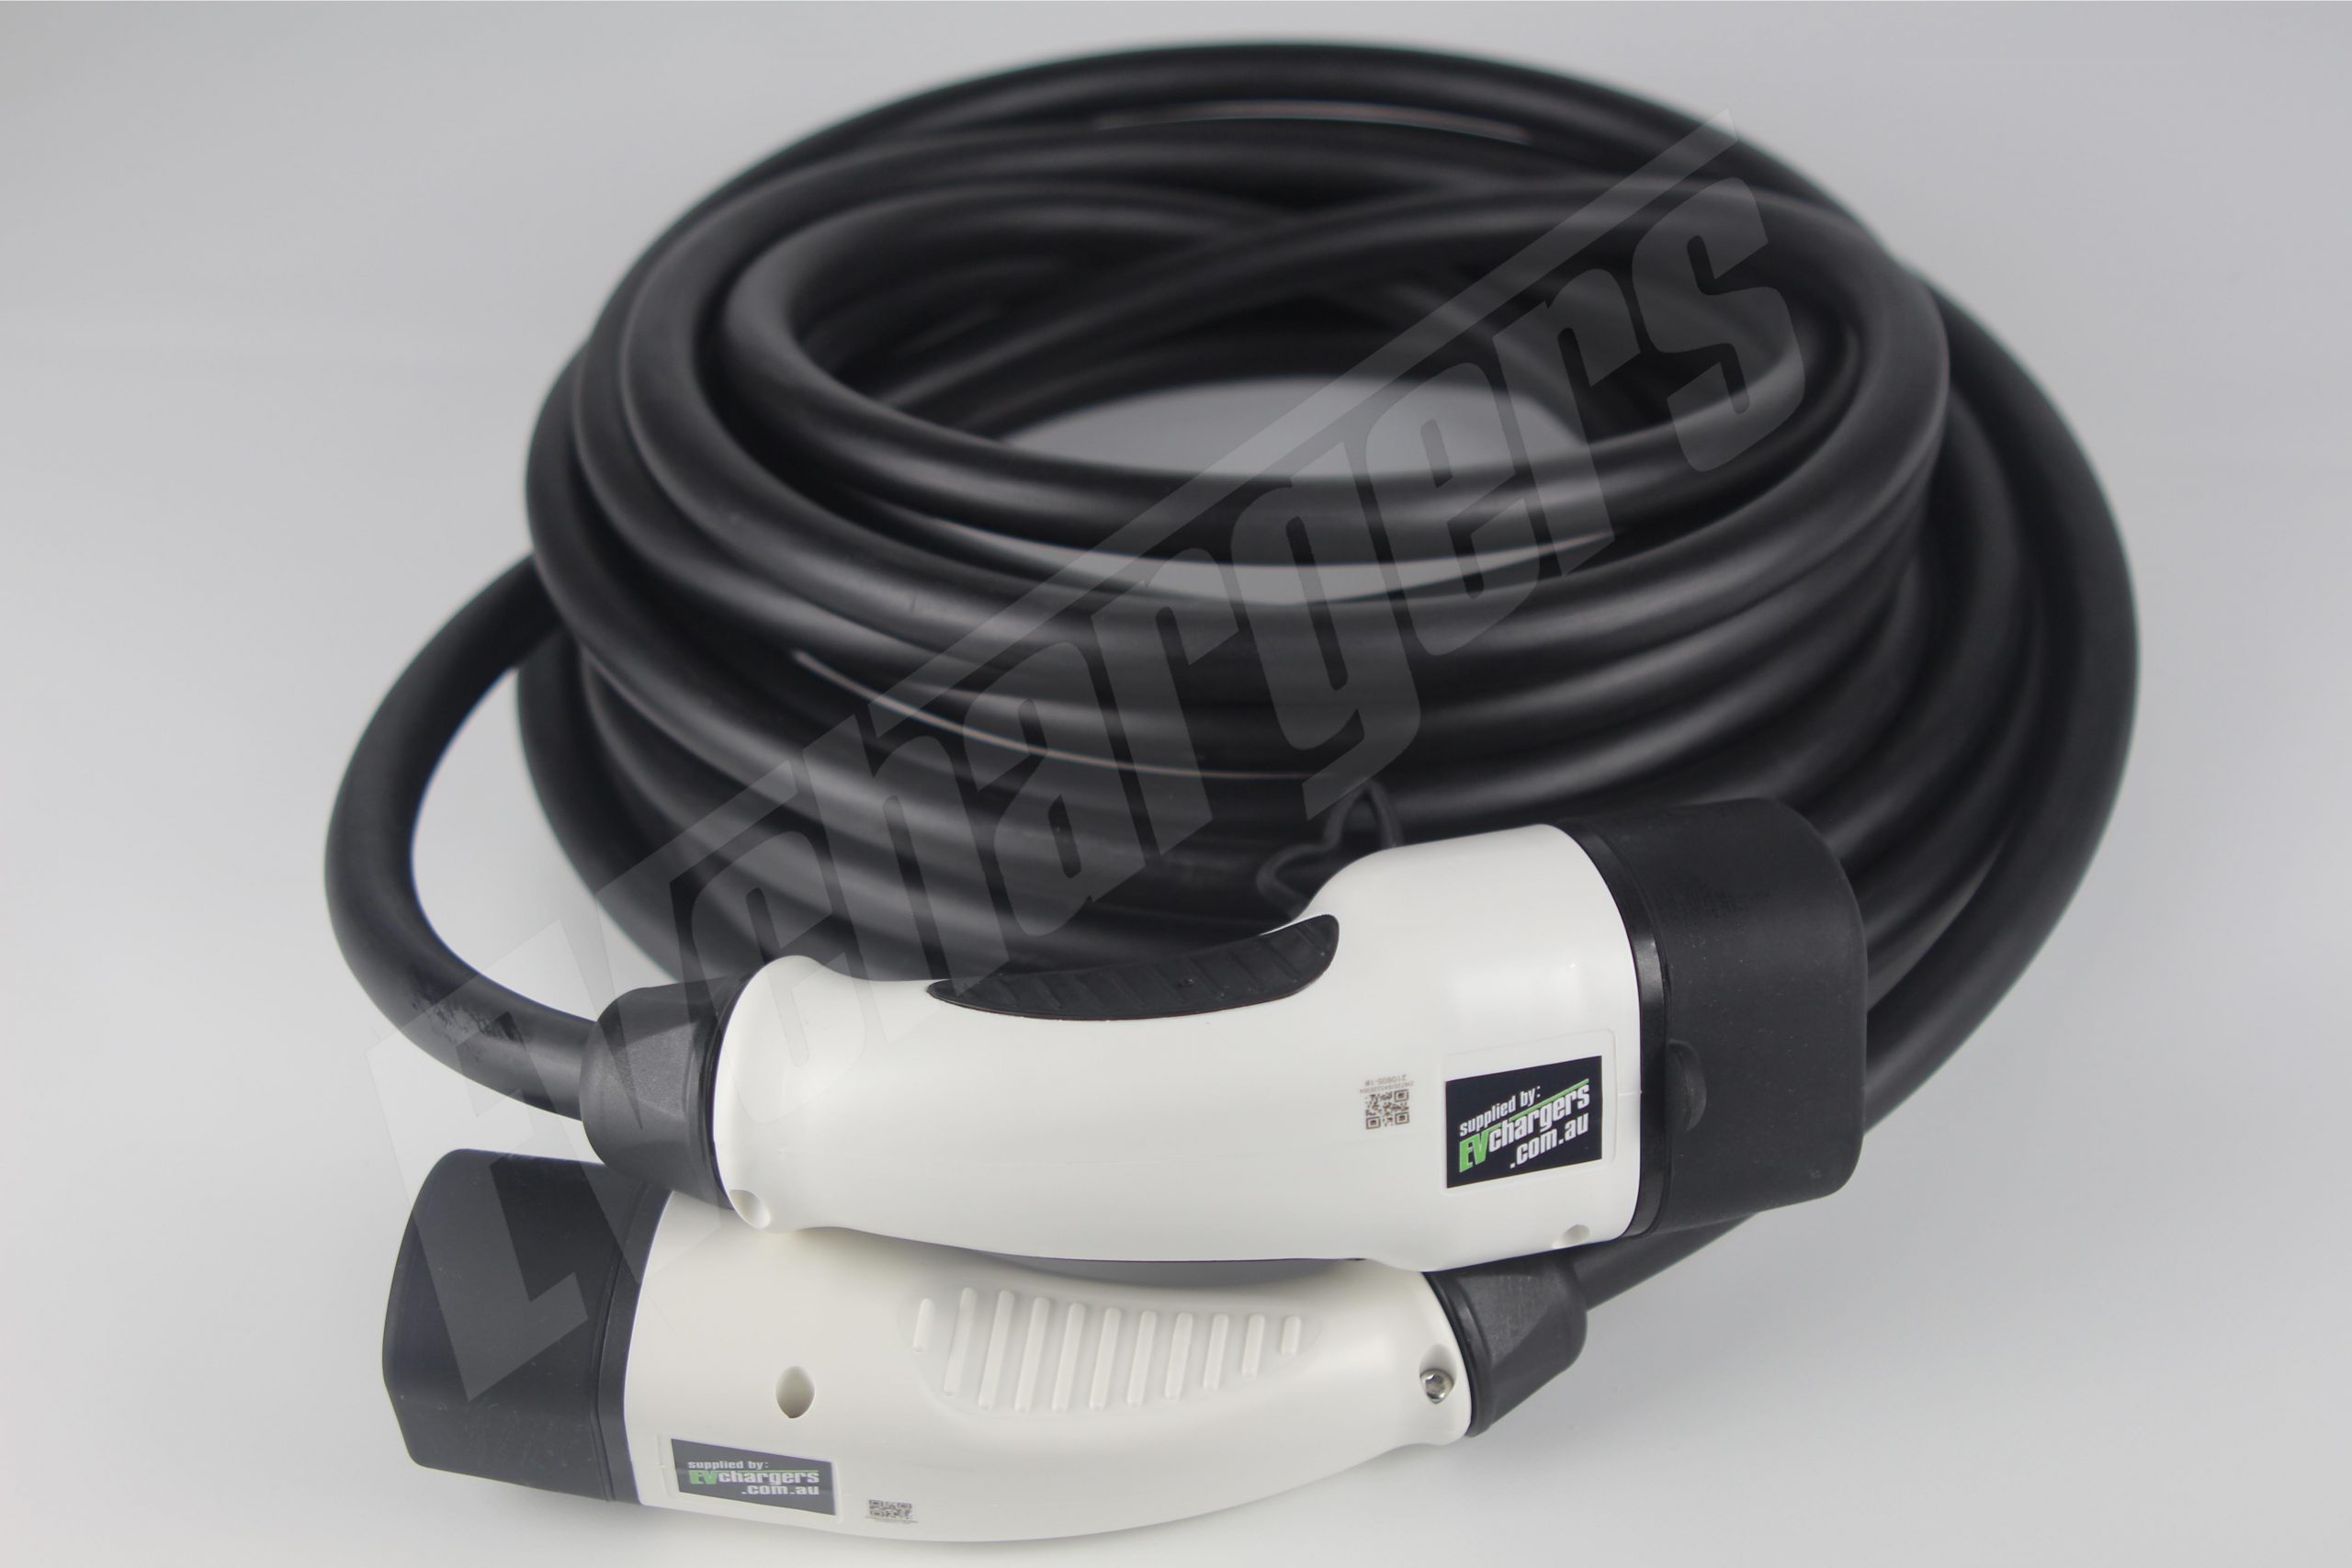 https://evchargers.com.au/wp-content/uploads/2019/03/10m-type-2-extension-cable-scaled.jpg